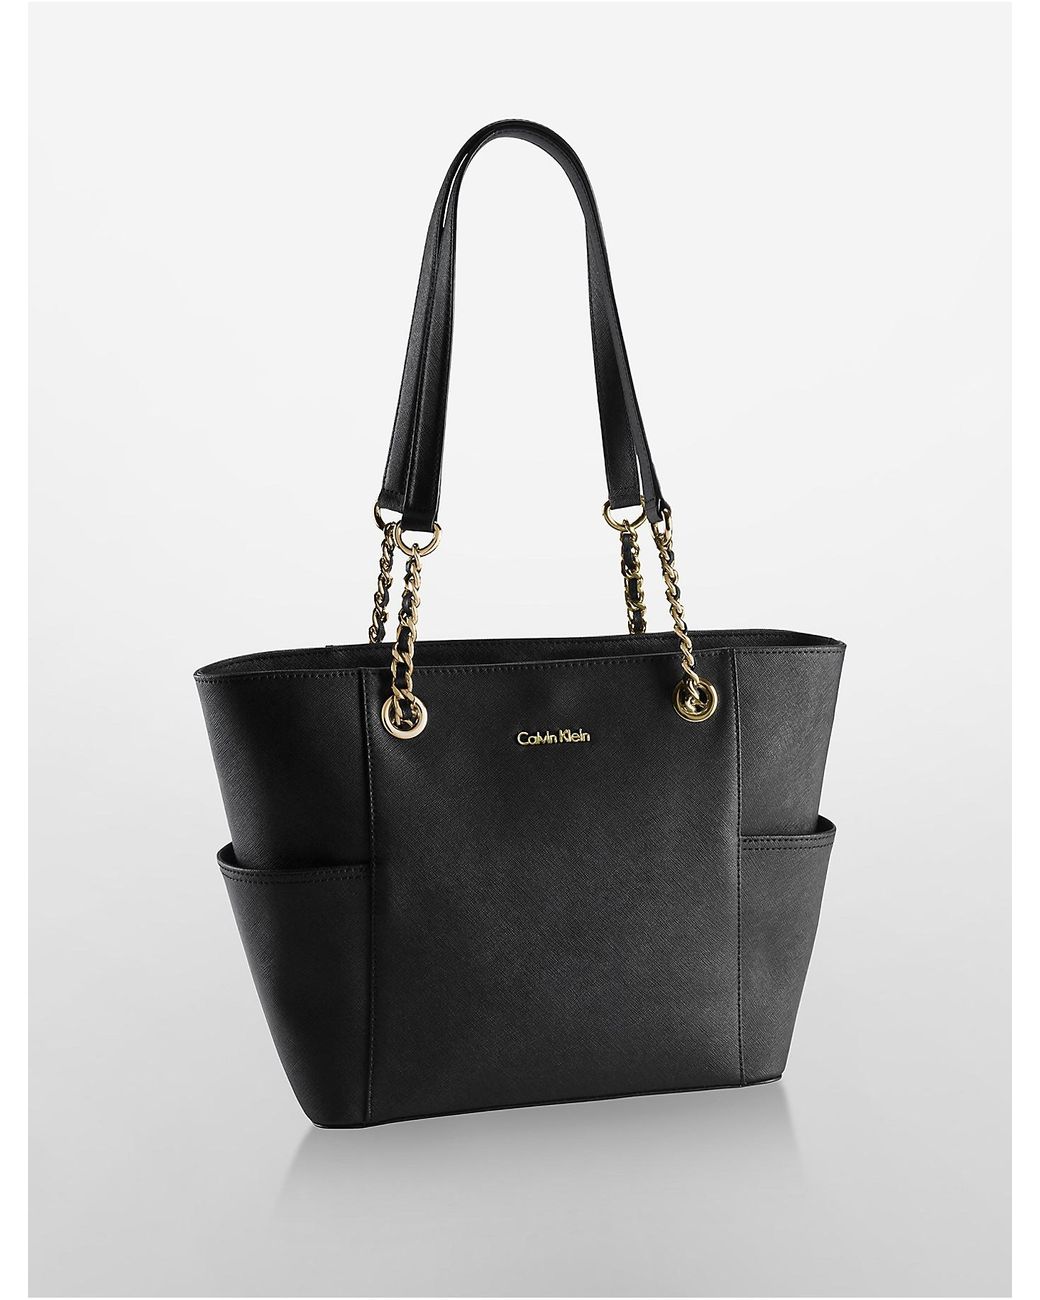 Calvin Klein Saffiano Leather Chain-trimmed Tote Bag in Black | Lyst